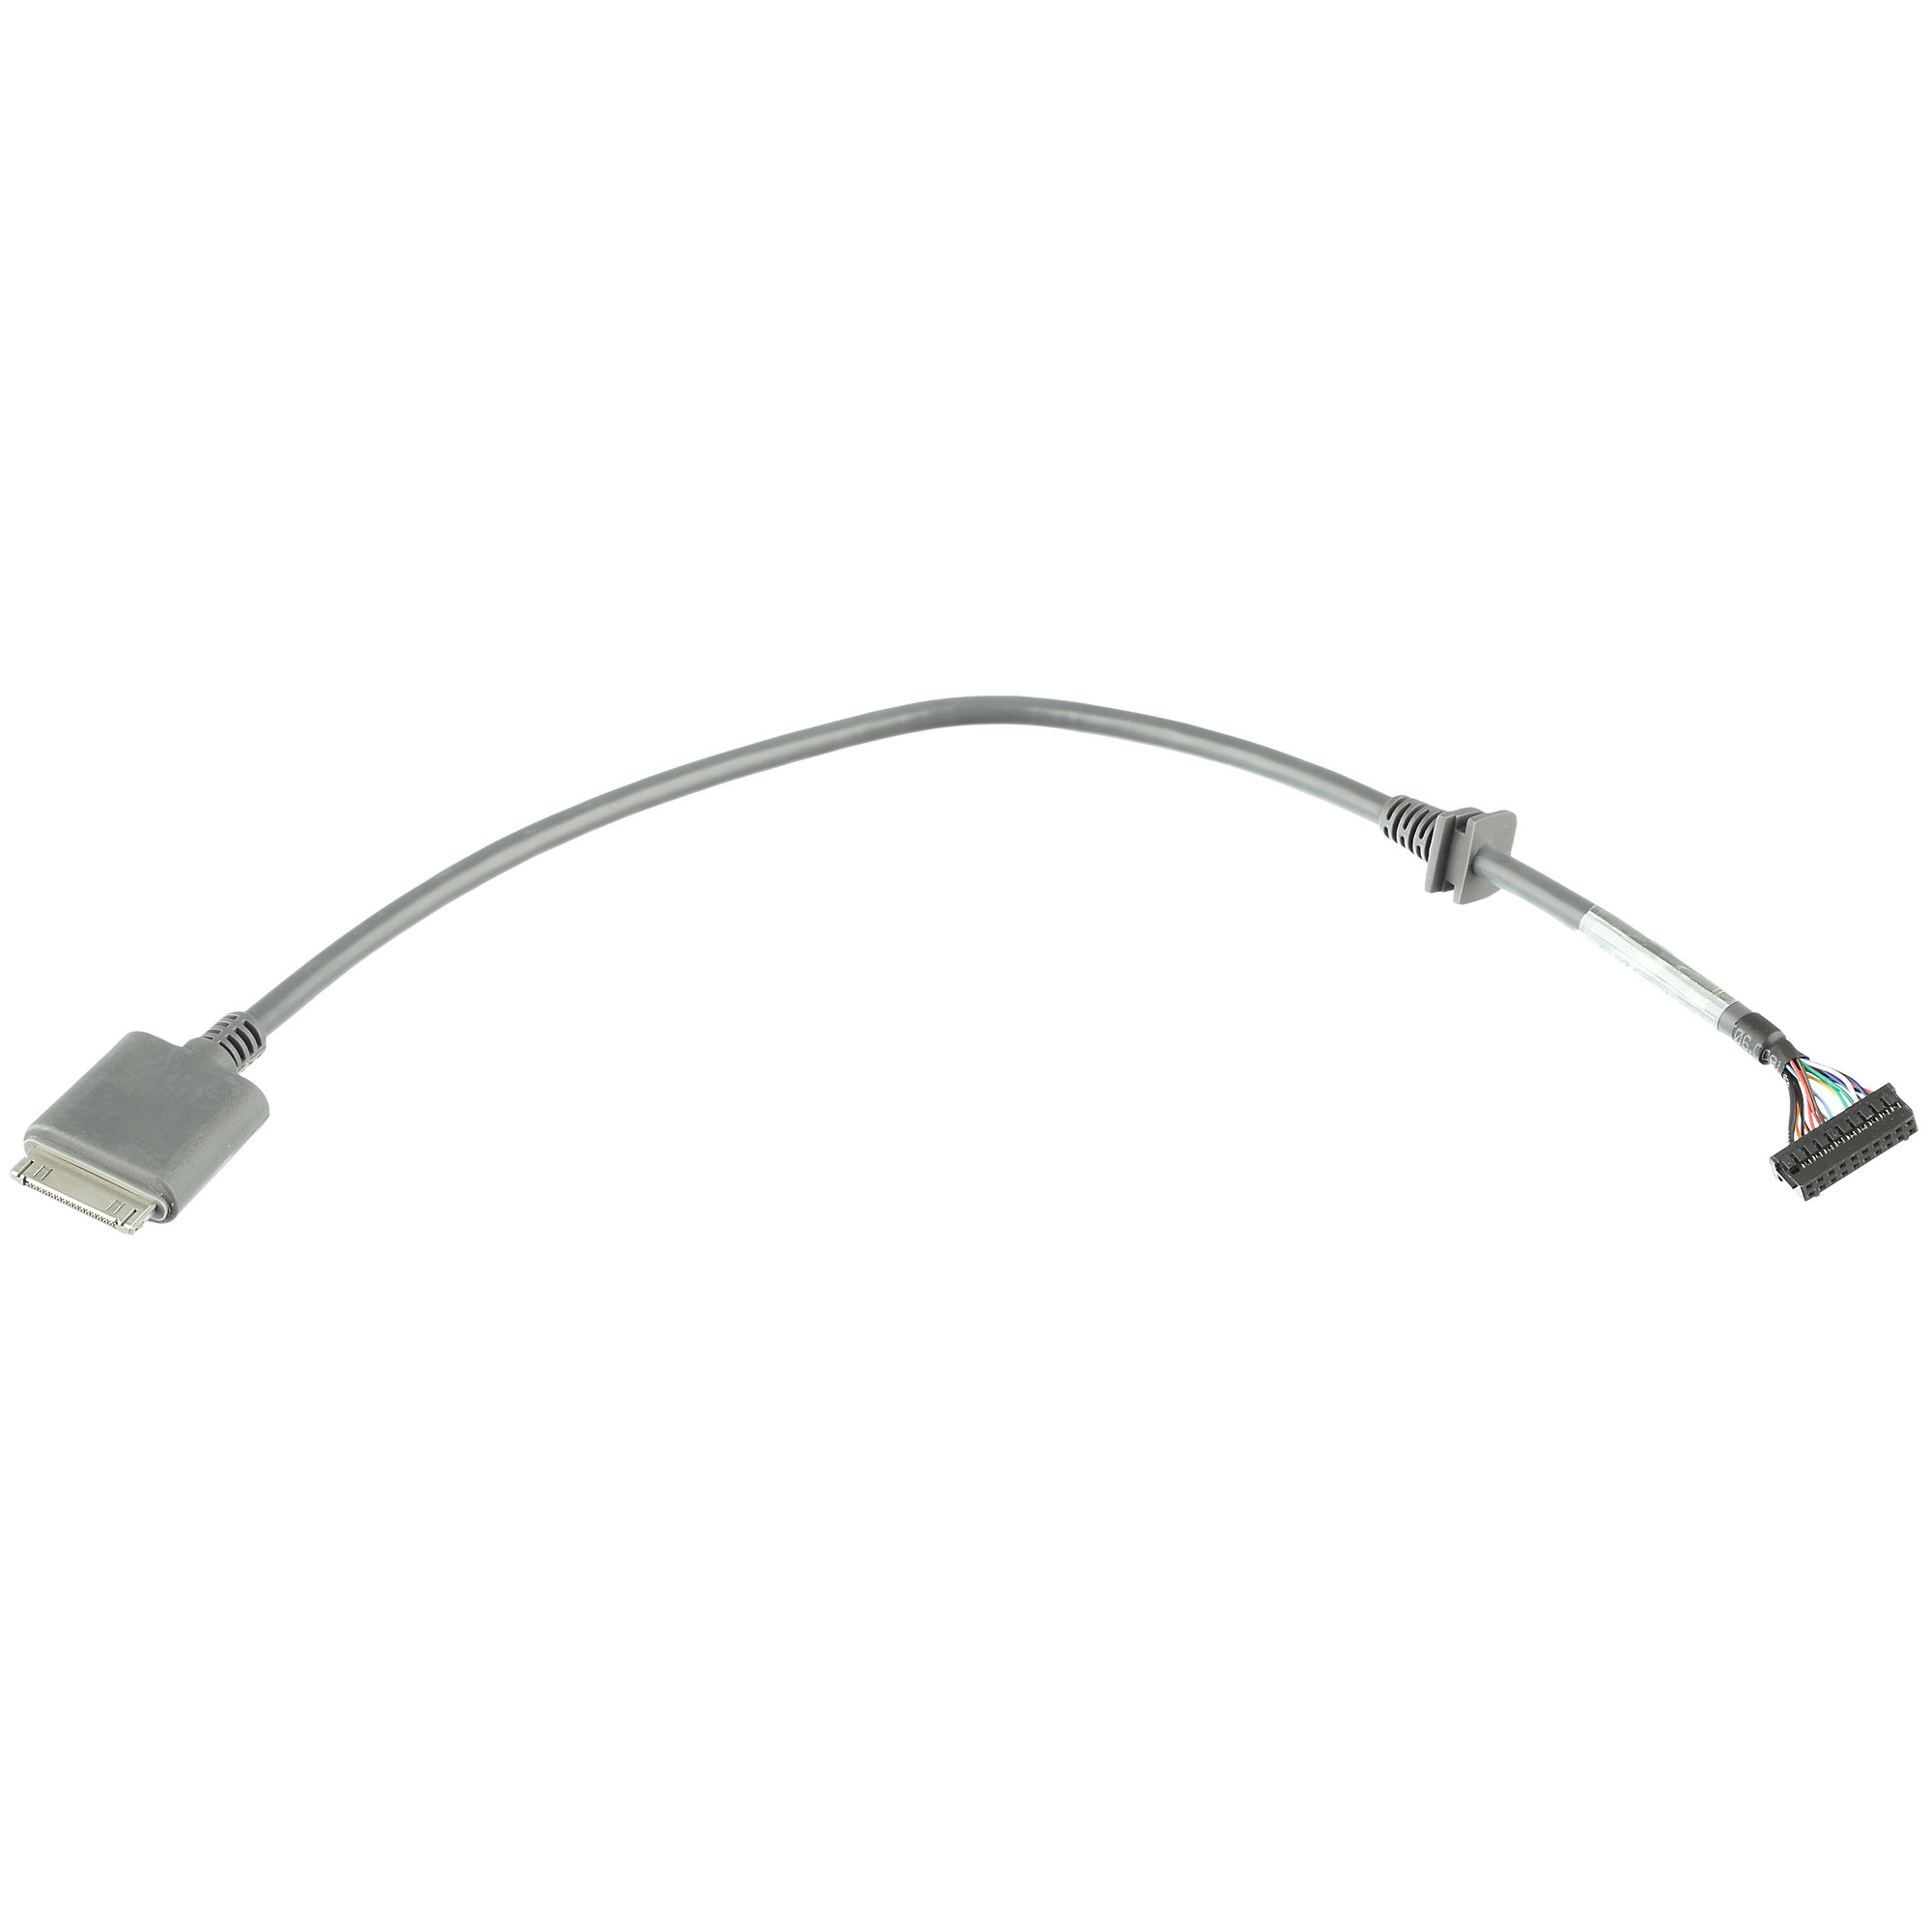 Overmolded iPod Cable, Integrity Treadmill